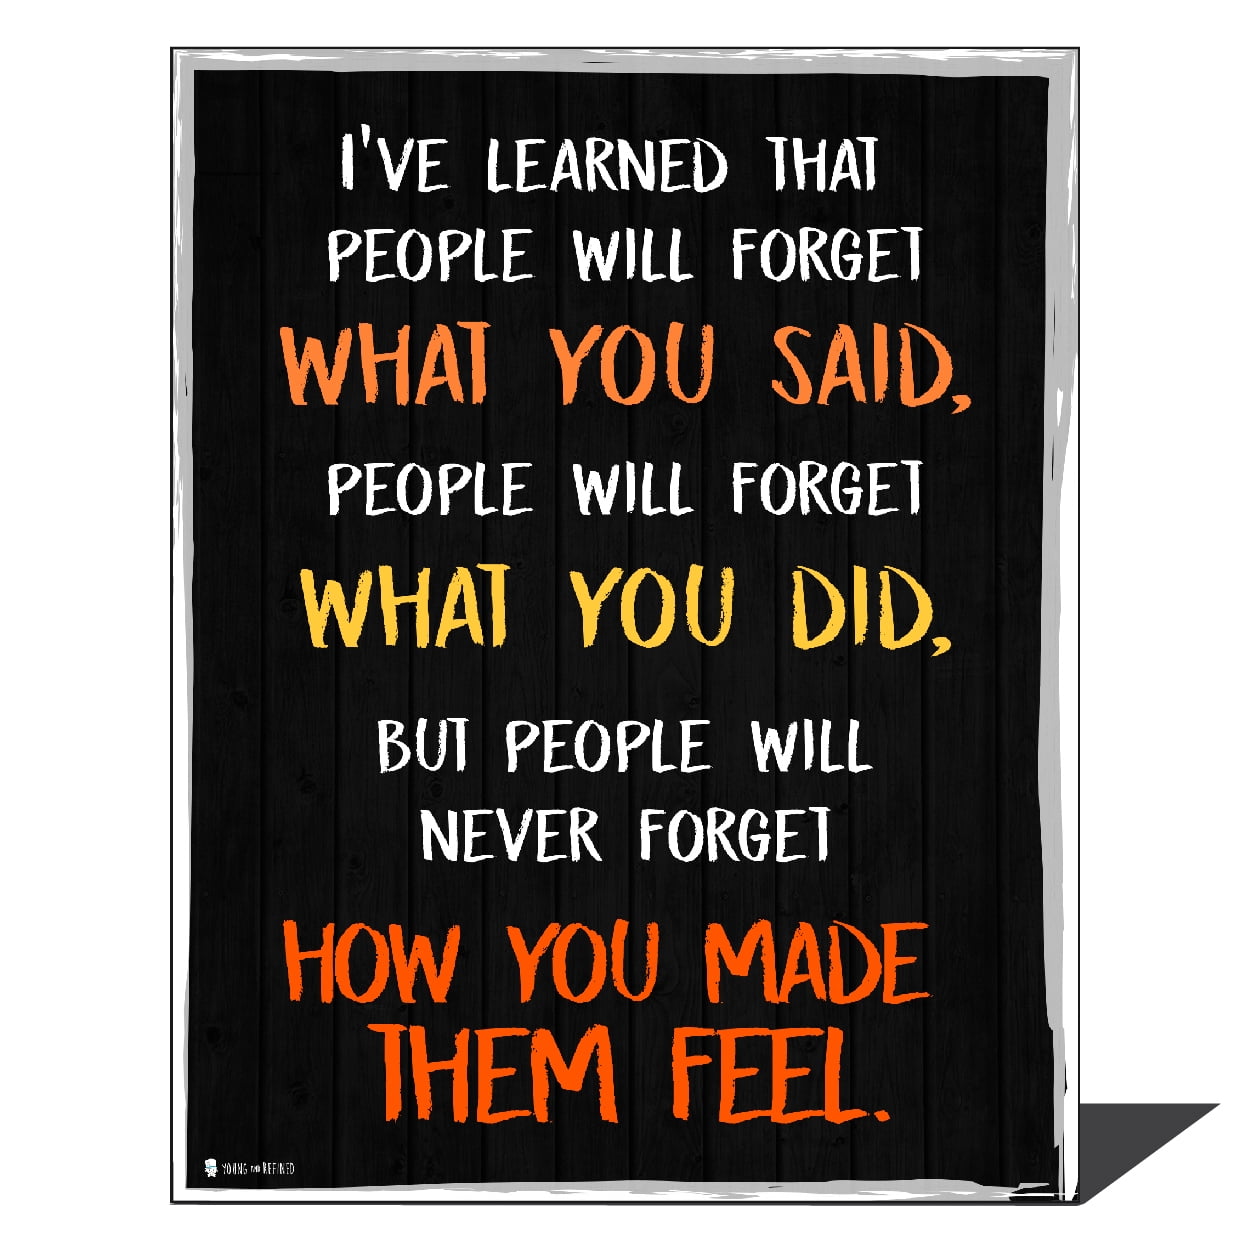 Maya Angelou People Will Forget What You Said Motivational Poster SPANISH 